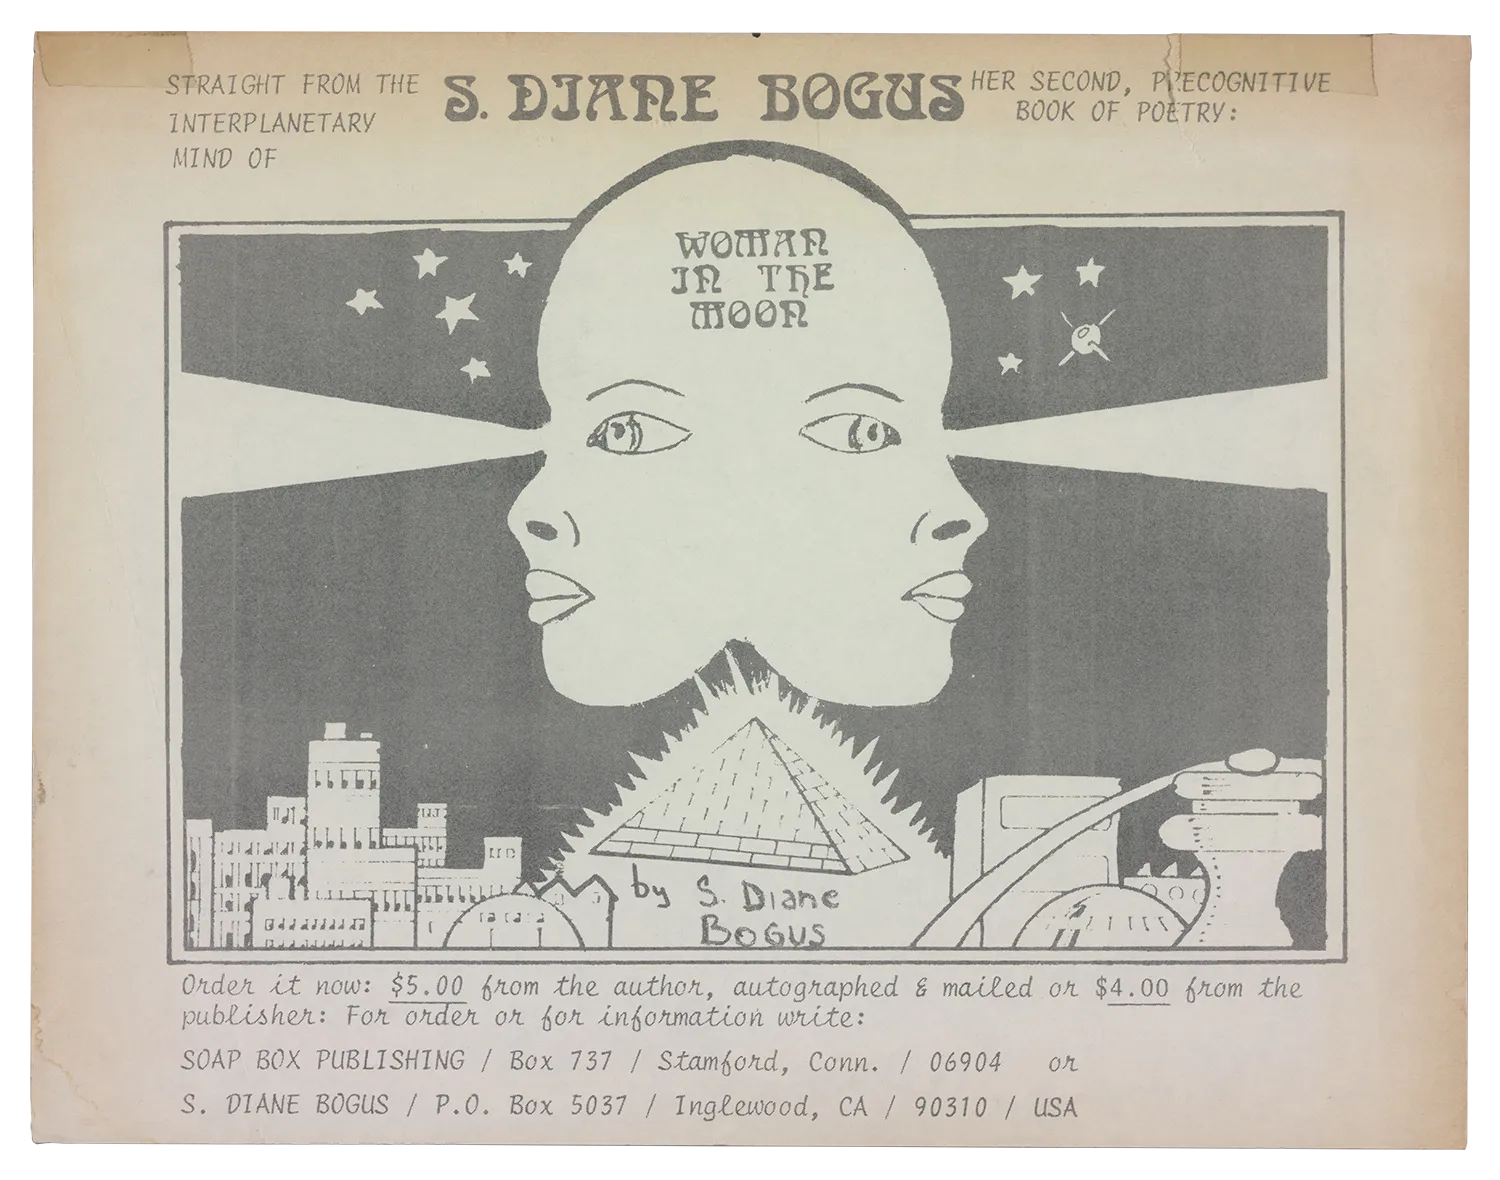 A black-and-white illustration on white paper. The illustration is of two faces looking away from each other in a mirror image with a beam of light from their forehead. Stars are overhead and a pyramid is underneath with a futuristic city landscape.